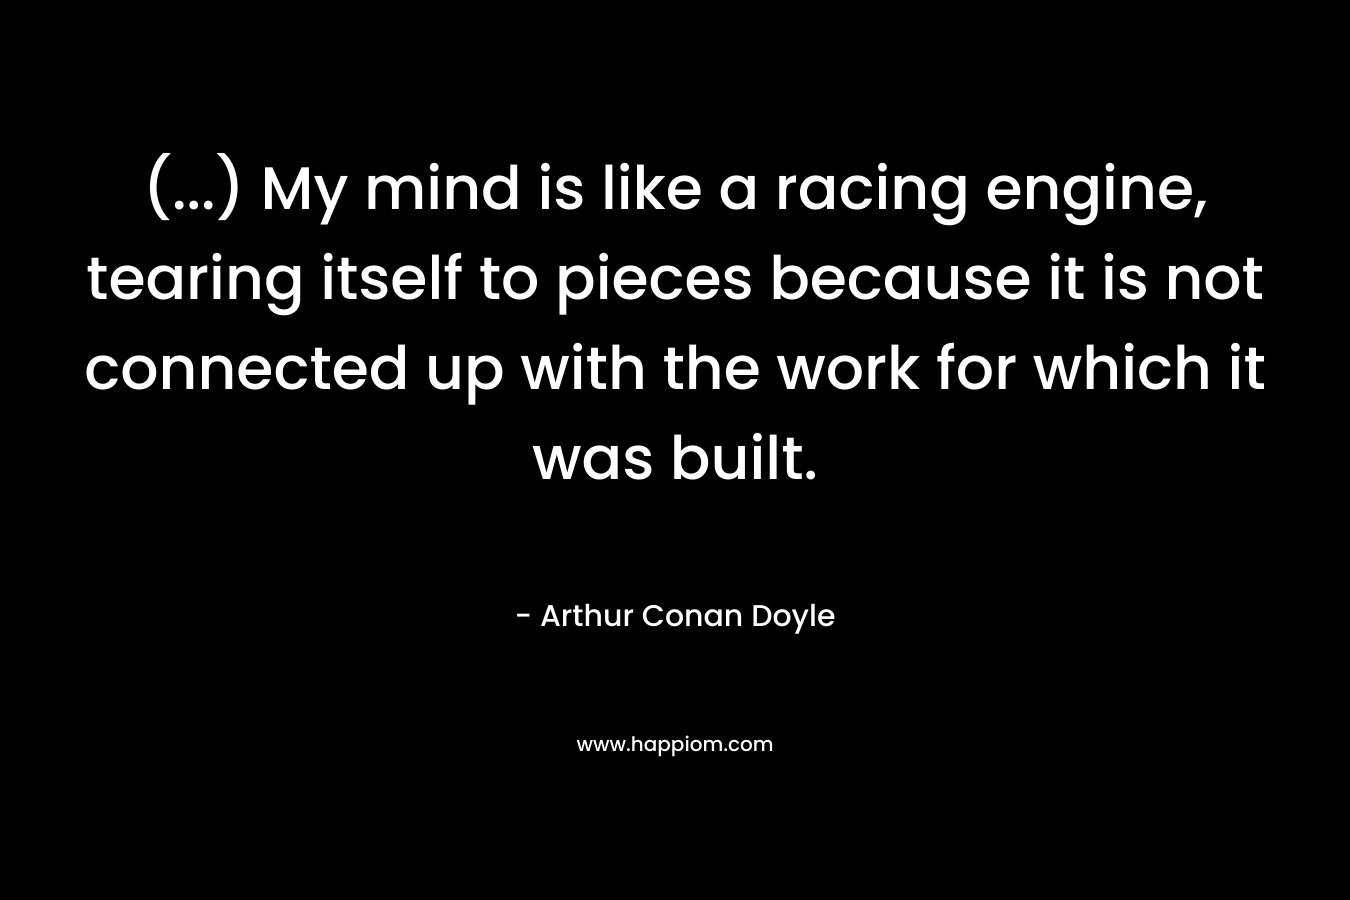 (...) My mind is like a racing engine, tearing itself to pieces because it is not connected up with the work for which it was built.